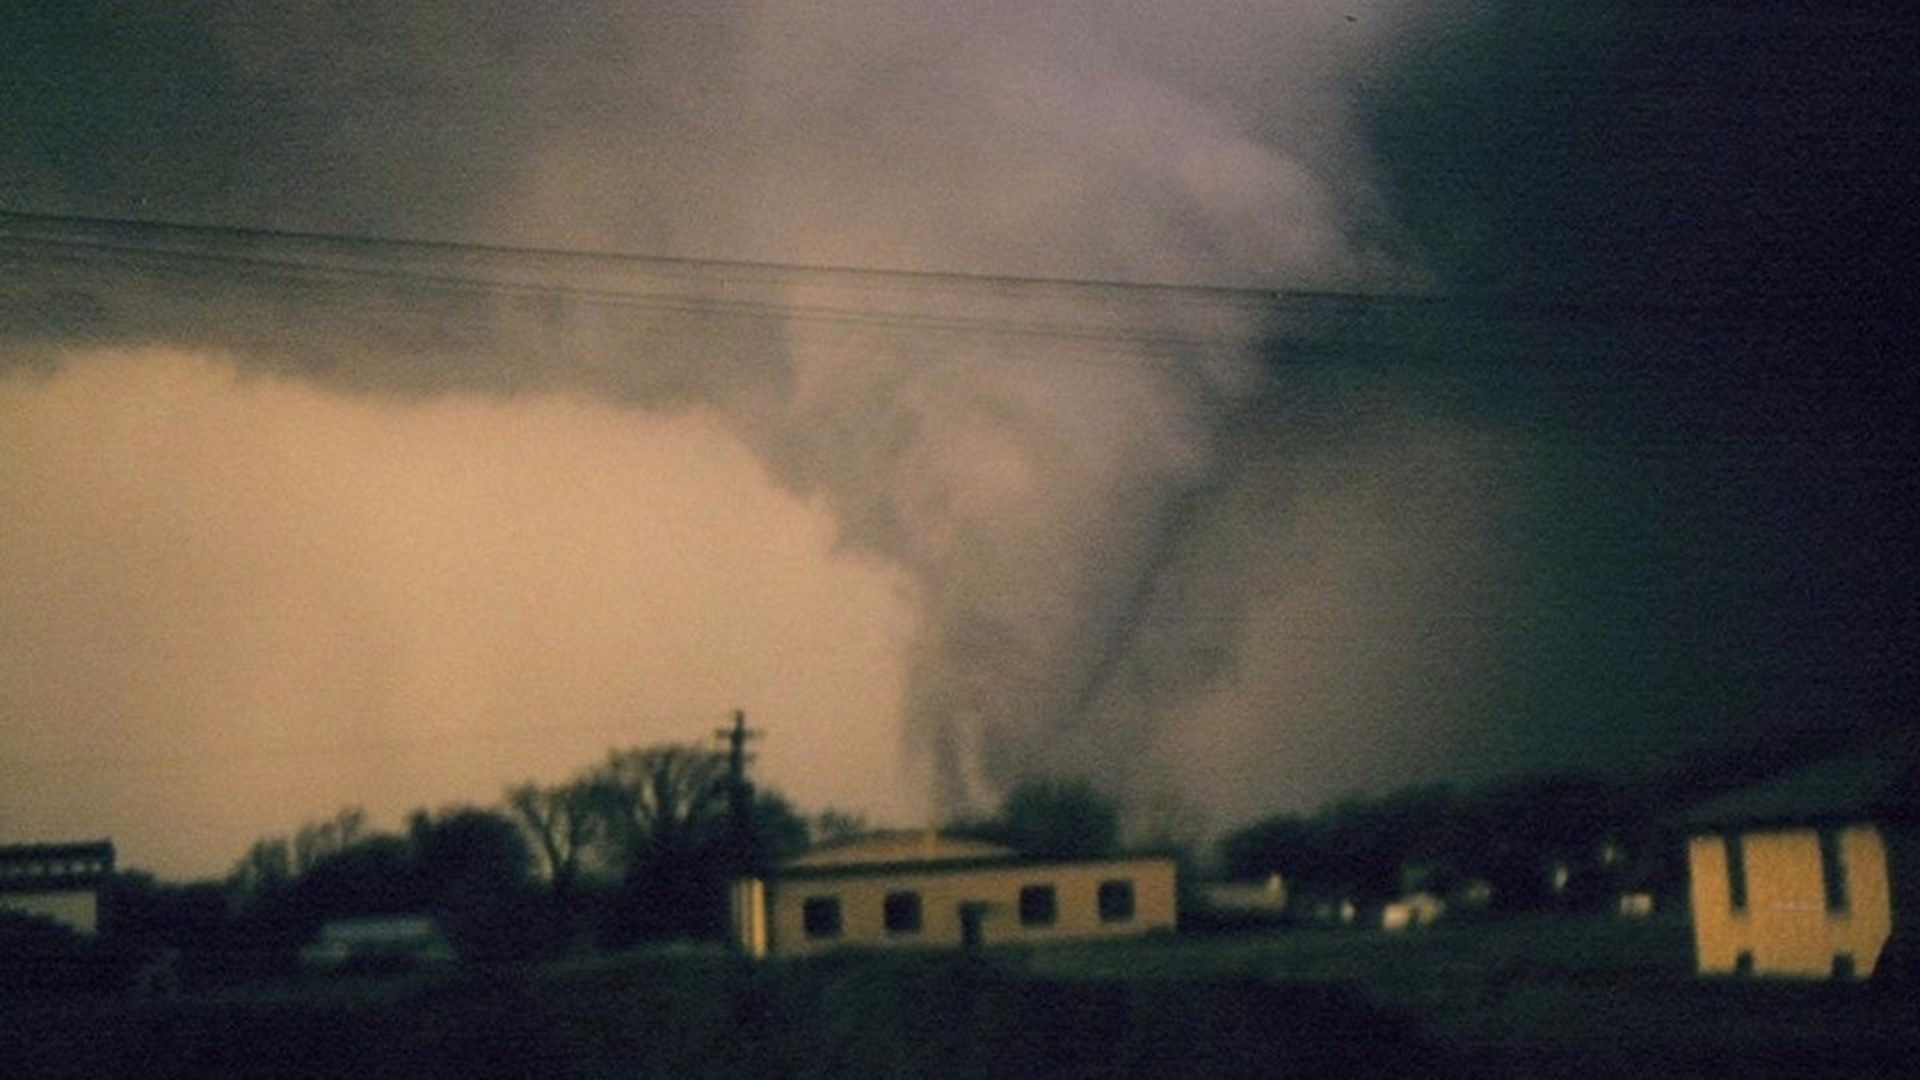 Wednesday, April 3 marks the 63rd anniversary of the strongest tornado in West Michigan's history. On April 3rd, 1956, an F-5 tornado tore through Hudsonville and Standale, causing devastation and killing at least 17 people. More than 300 people were injured.